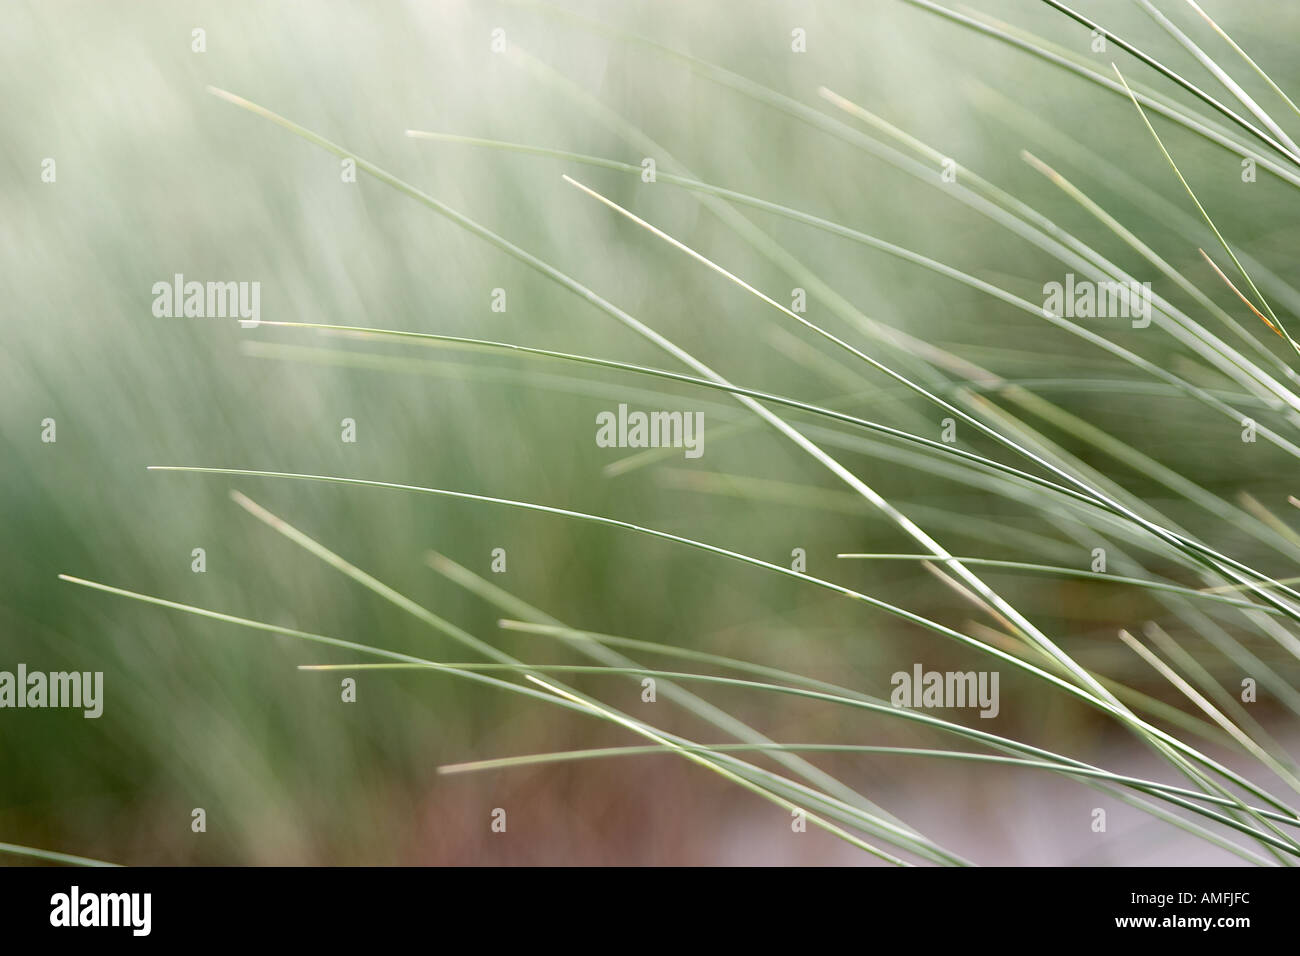 landscape shot showing close up detail of beach grass with shallow focus Stock Photo